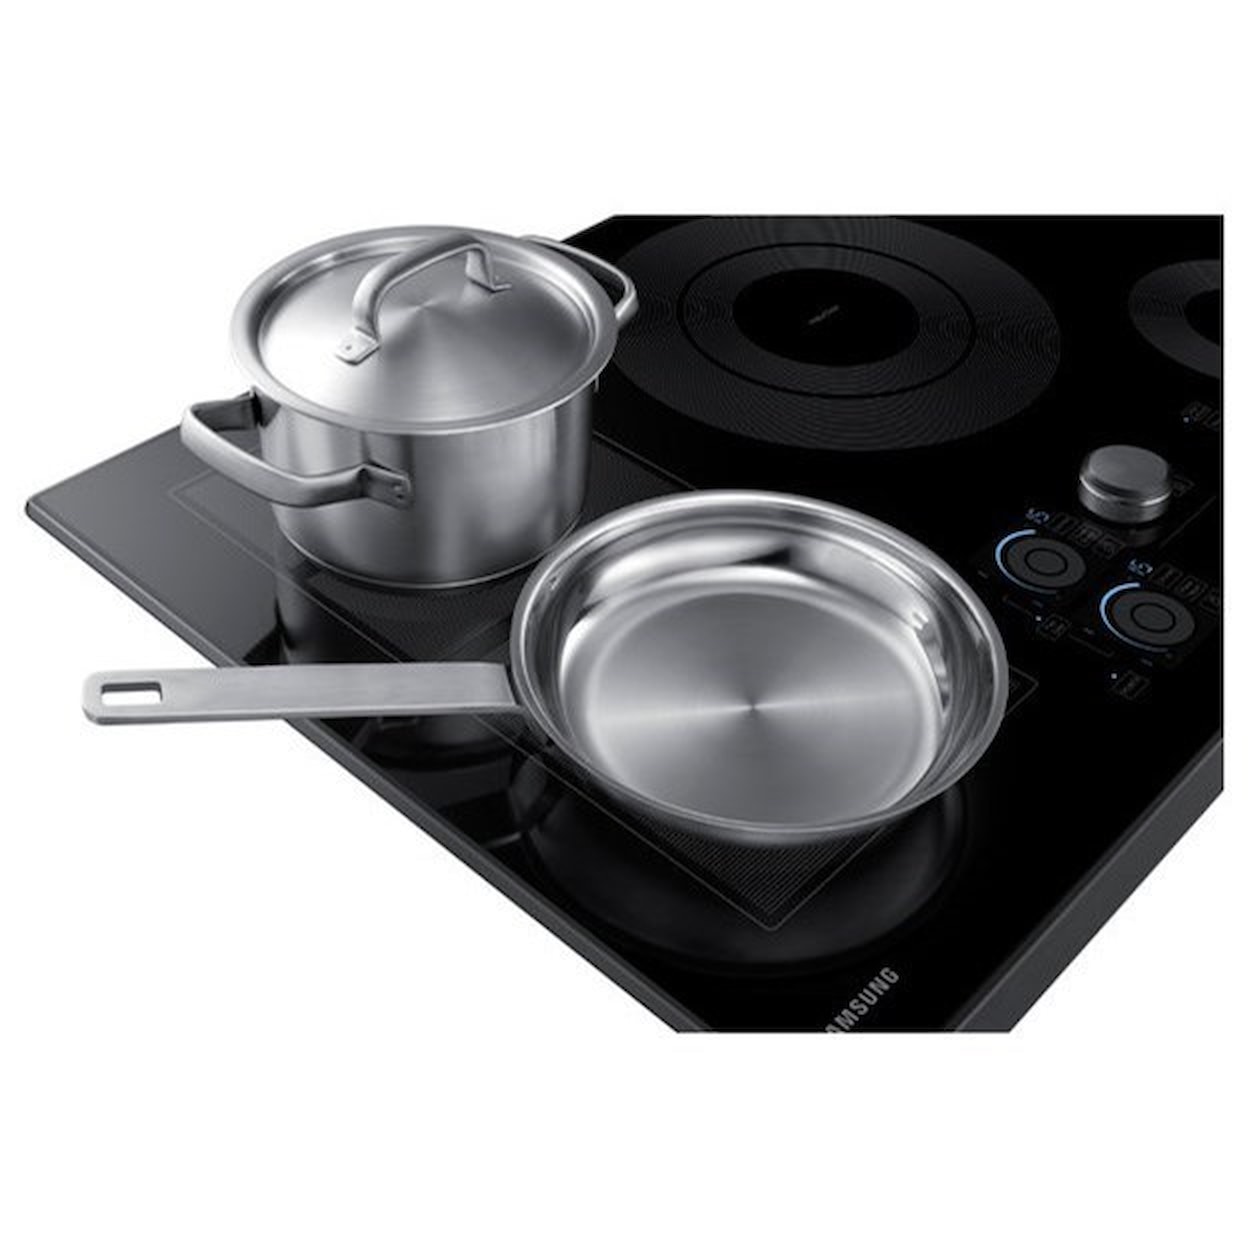 Samsung Appliances Electric Cooktops - Samsung 30" Induction Cooktop